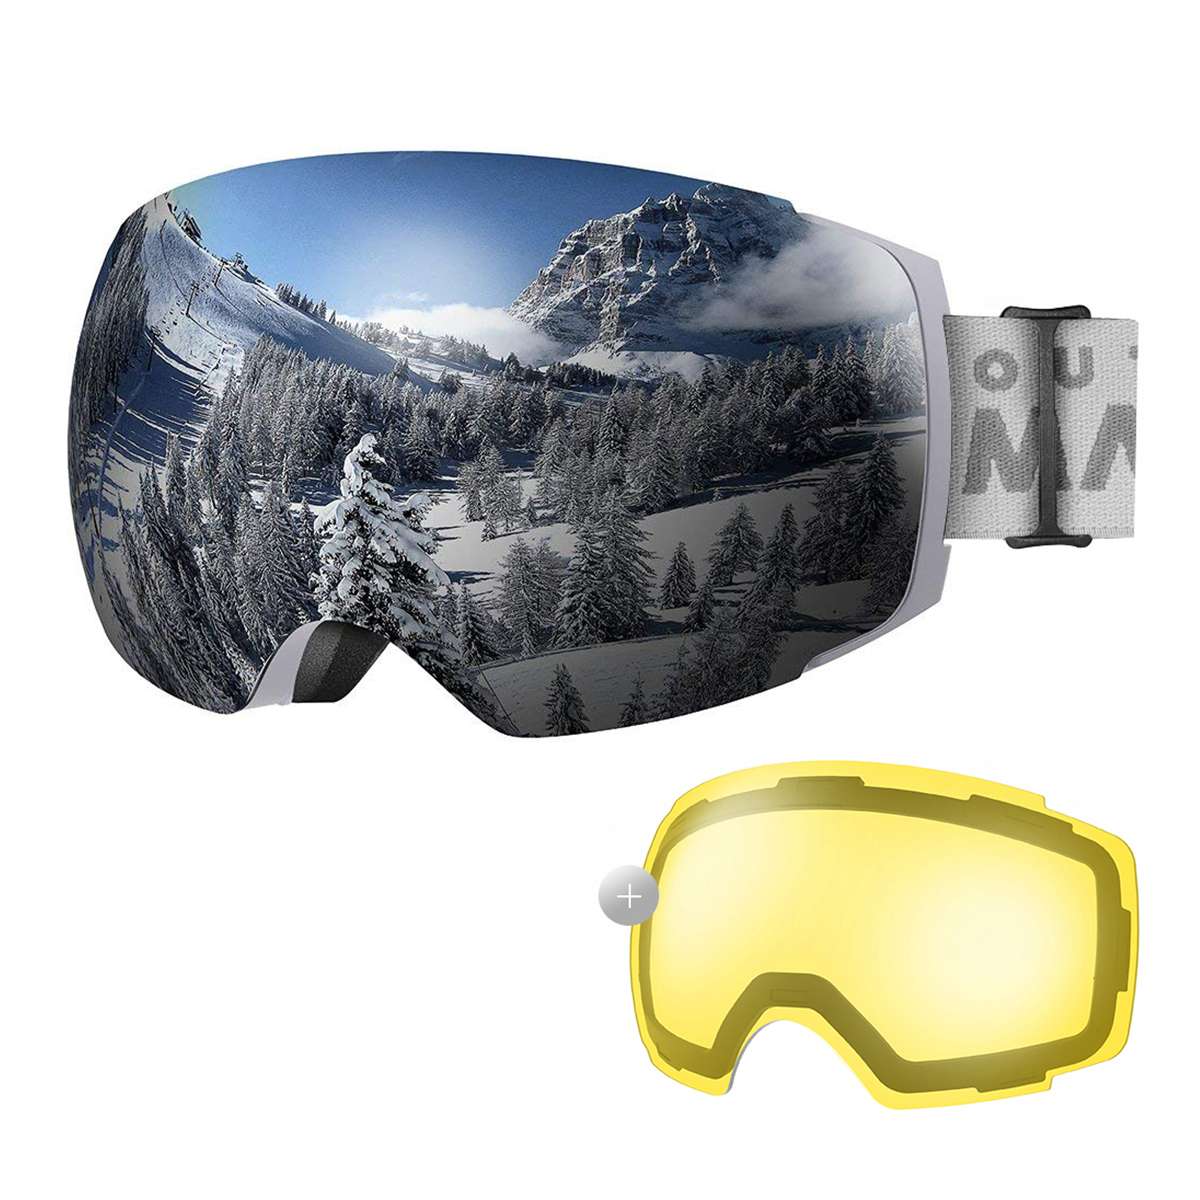 QF-S715 New 2020 Skiing Eyewear Available Snowboard Goggles Men